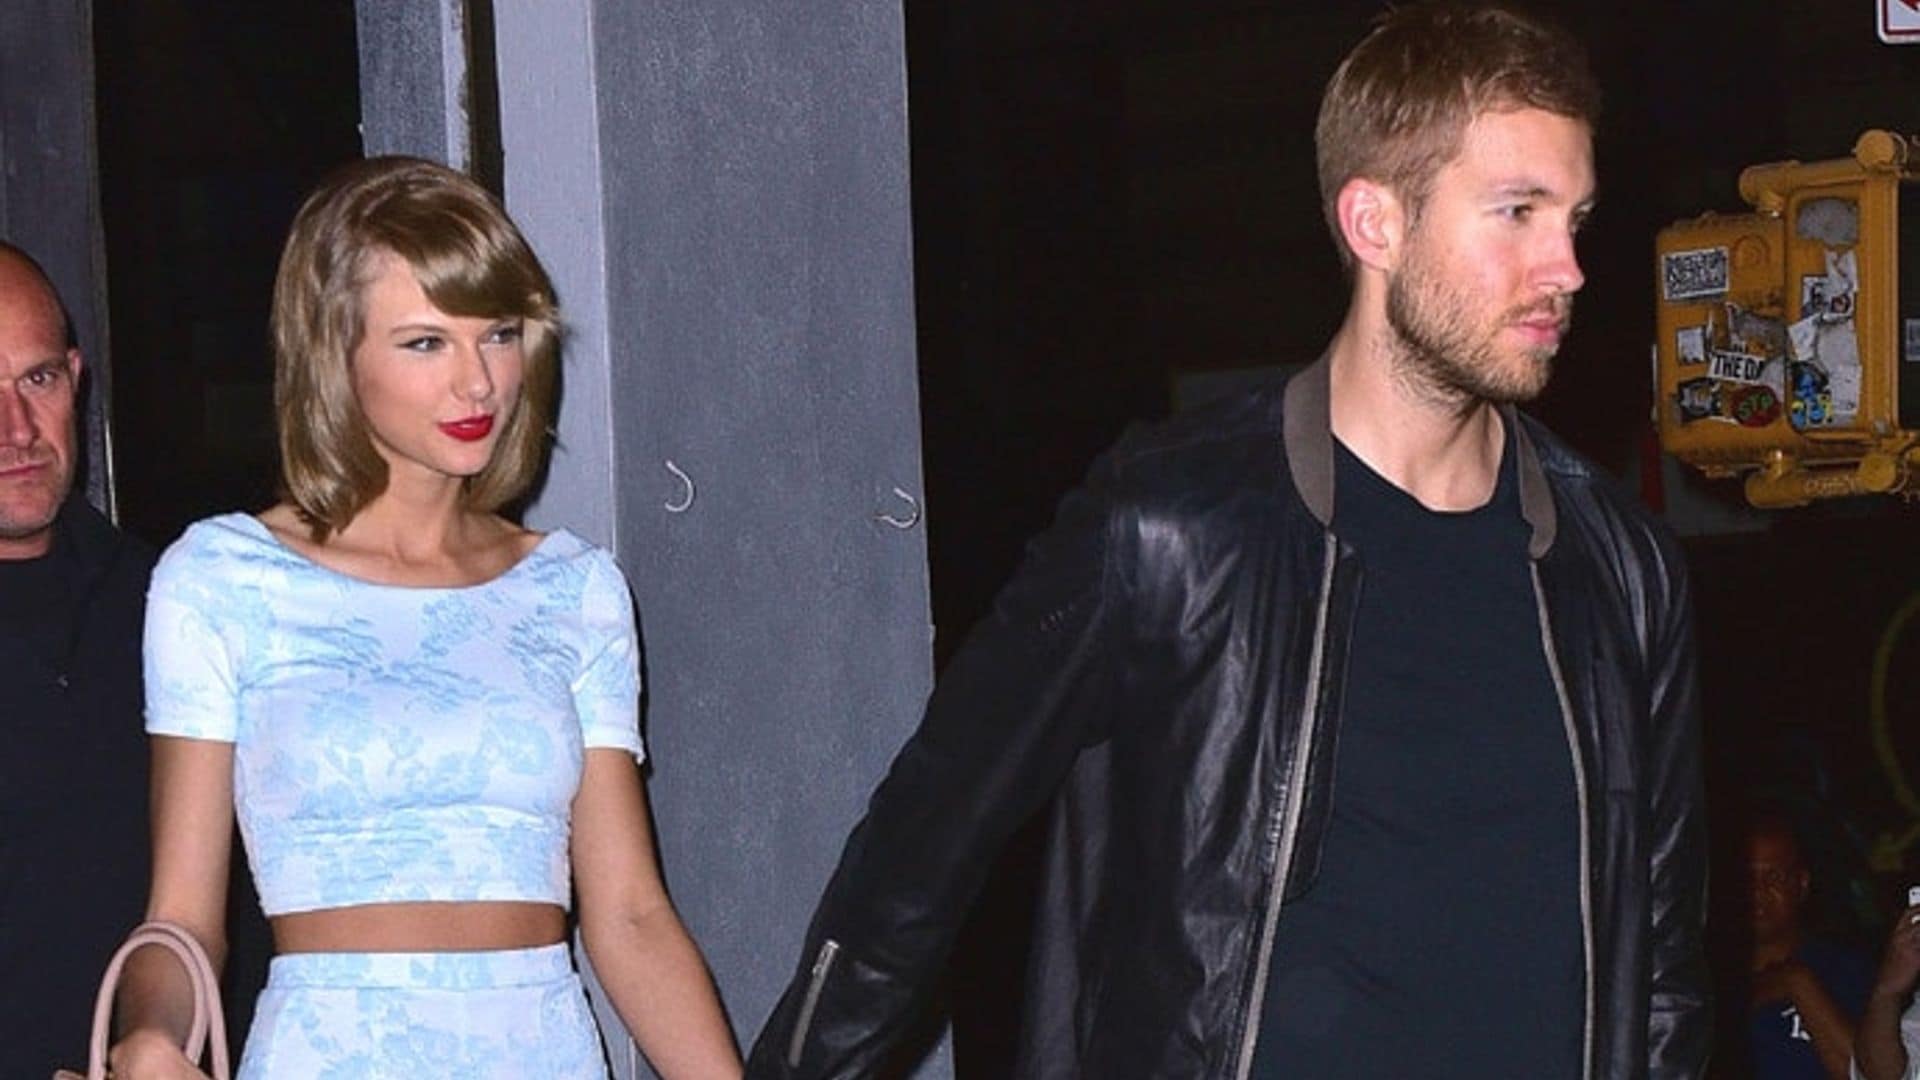 Taylor Swift hits town with Calvin Harris after topping Forbes list